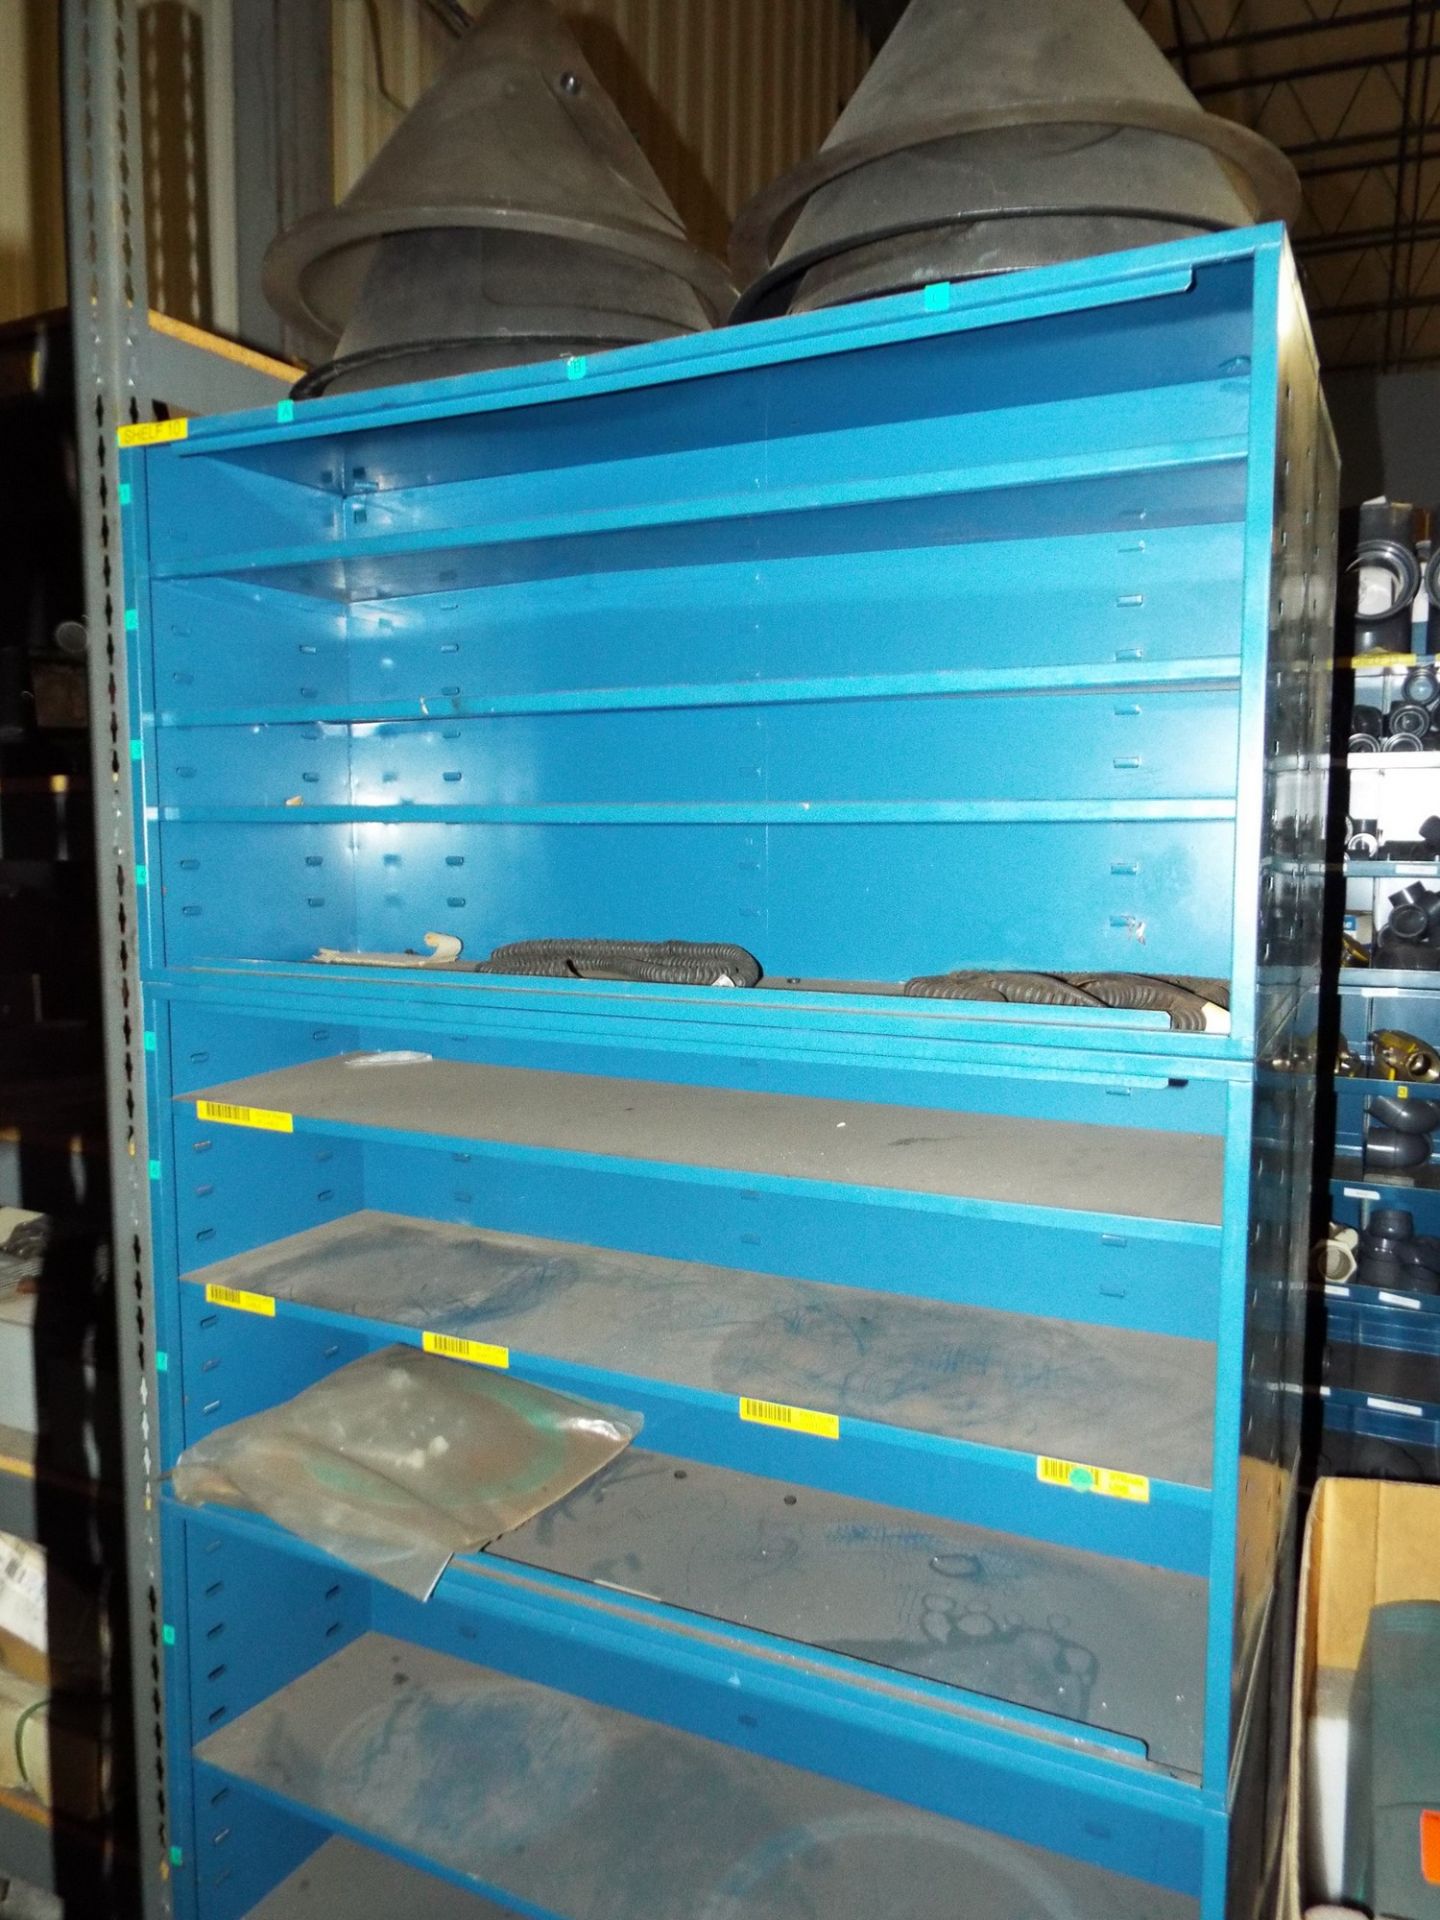 LOT/ SHELVES WITH CONTENTS - ELECTRICAL COMPONENTS, CONTROL BOXES, PRESS CONTROLS, SPARE PARTS - Image 3 of 3